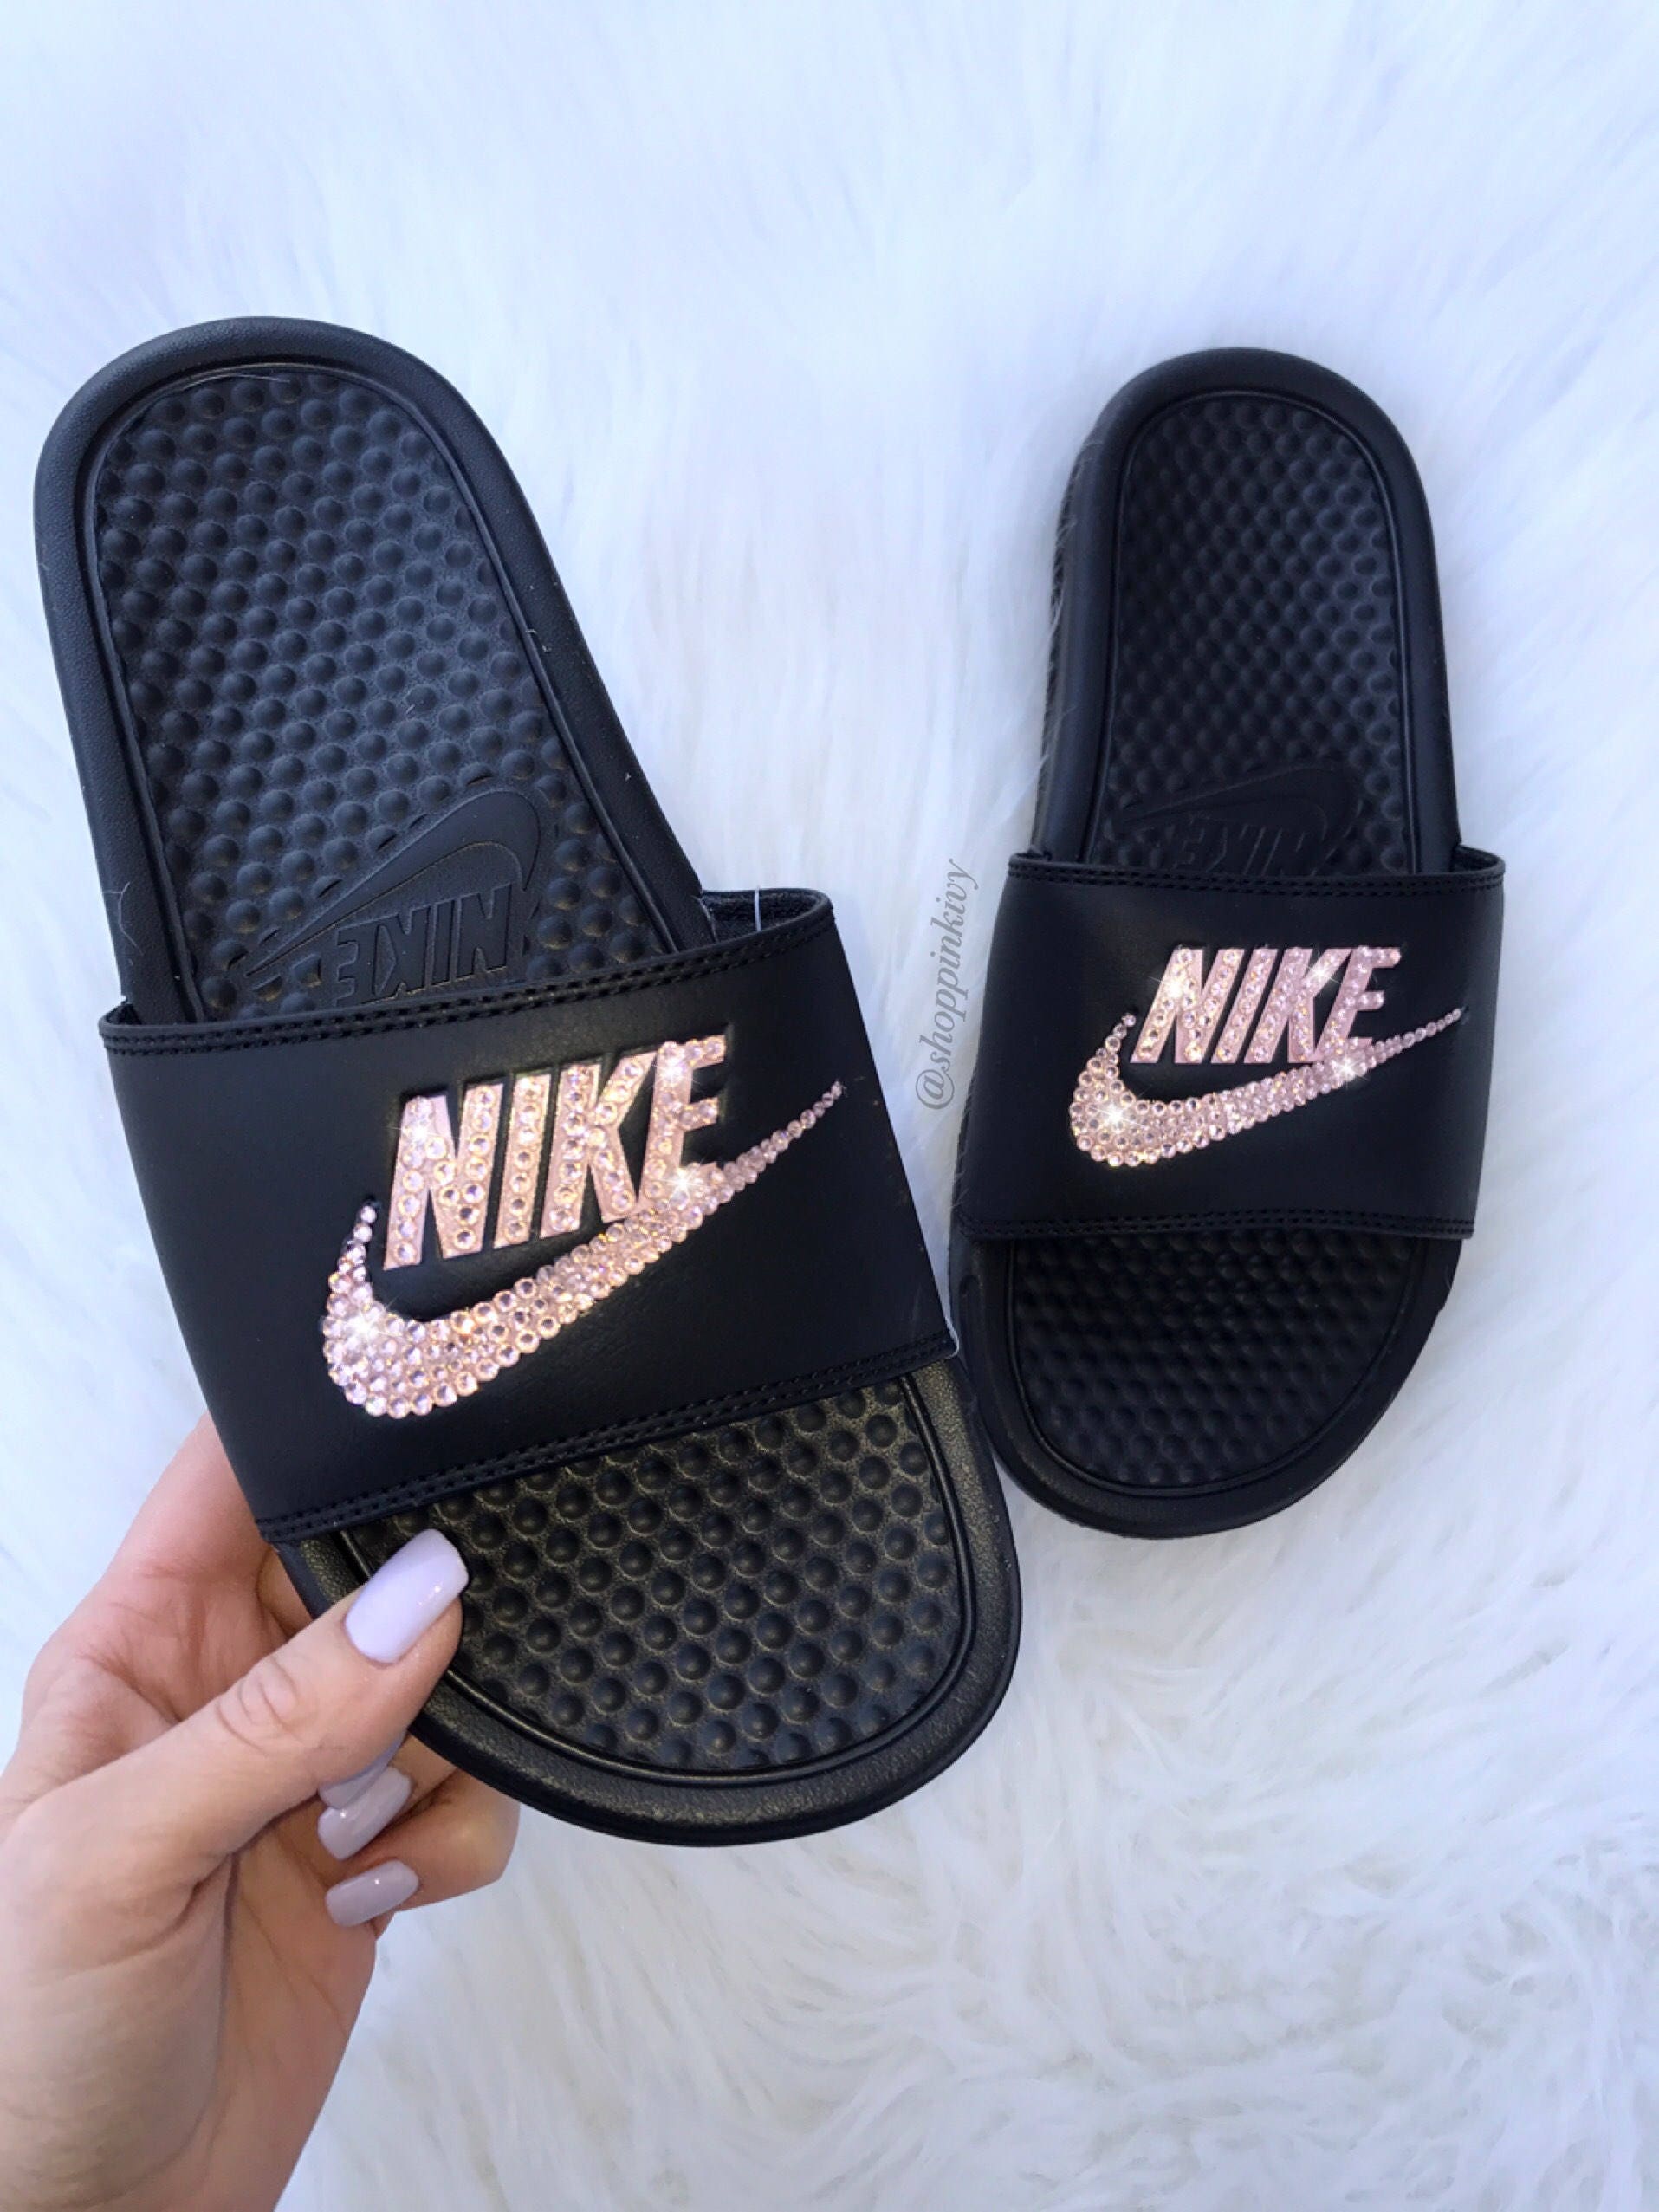 black red and gold nike slides